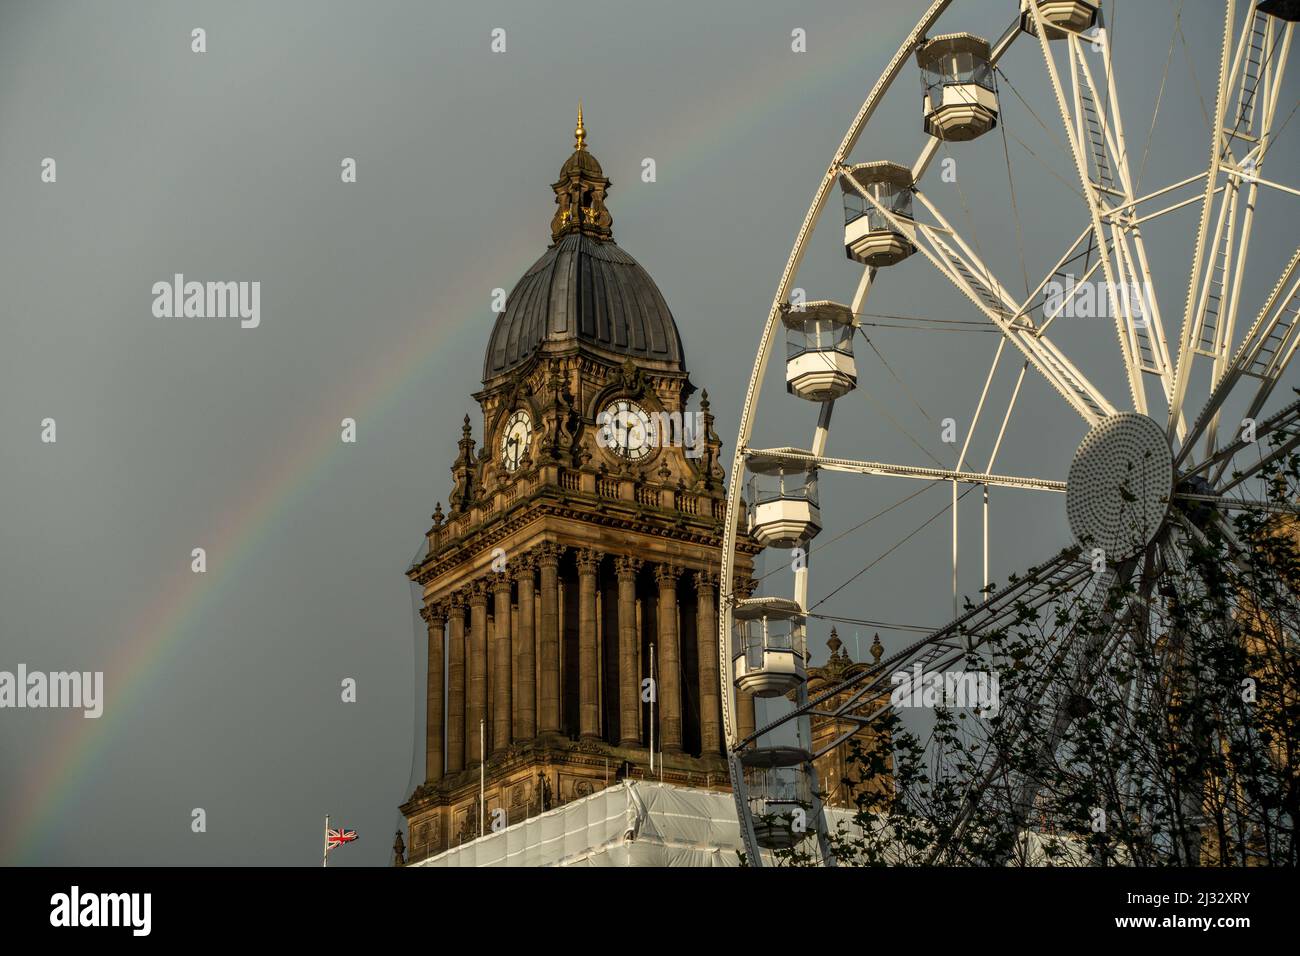 Leeds Wheel of Light ferris wheel and the tower of Leeds Town Hall on The Headrow with a rainbow on a rainy day, Leeds, West Yorkshire, England, UK Stock Photo